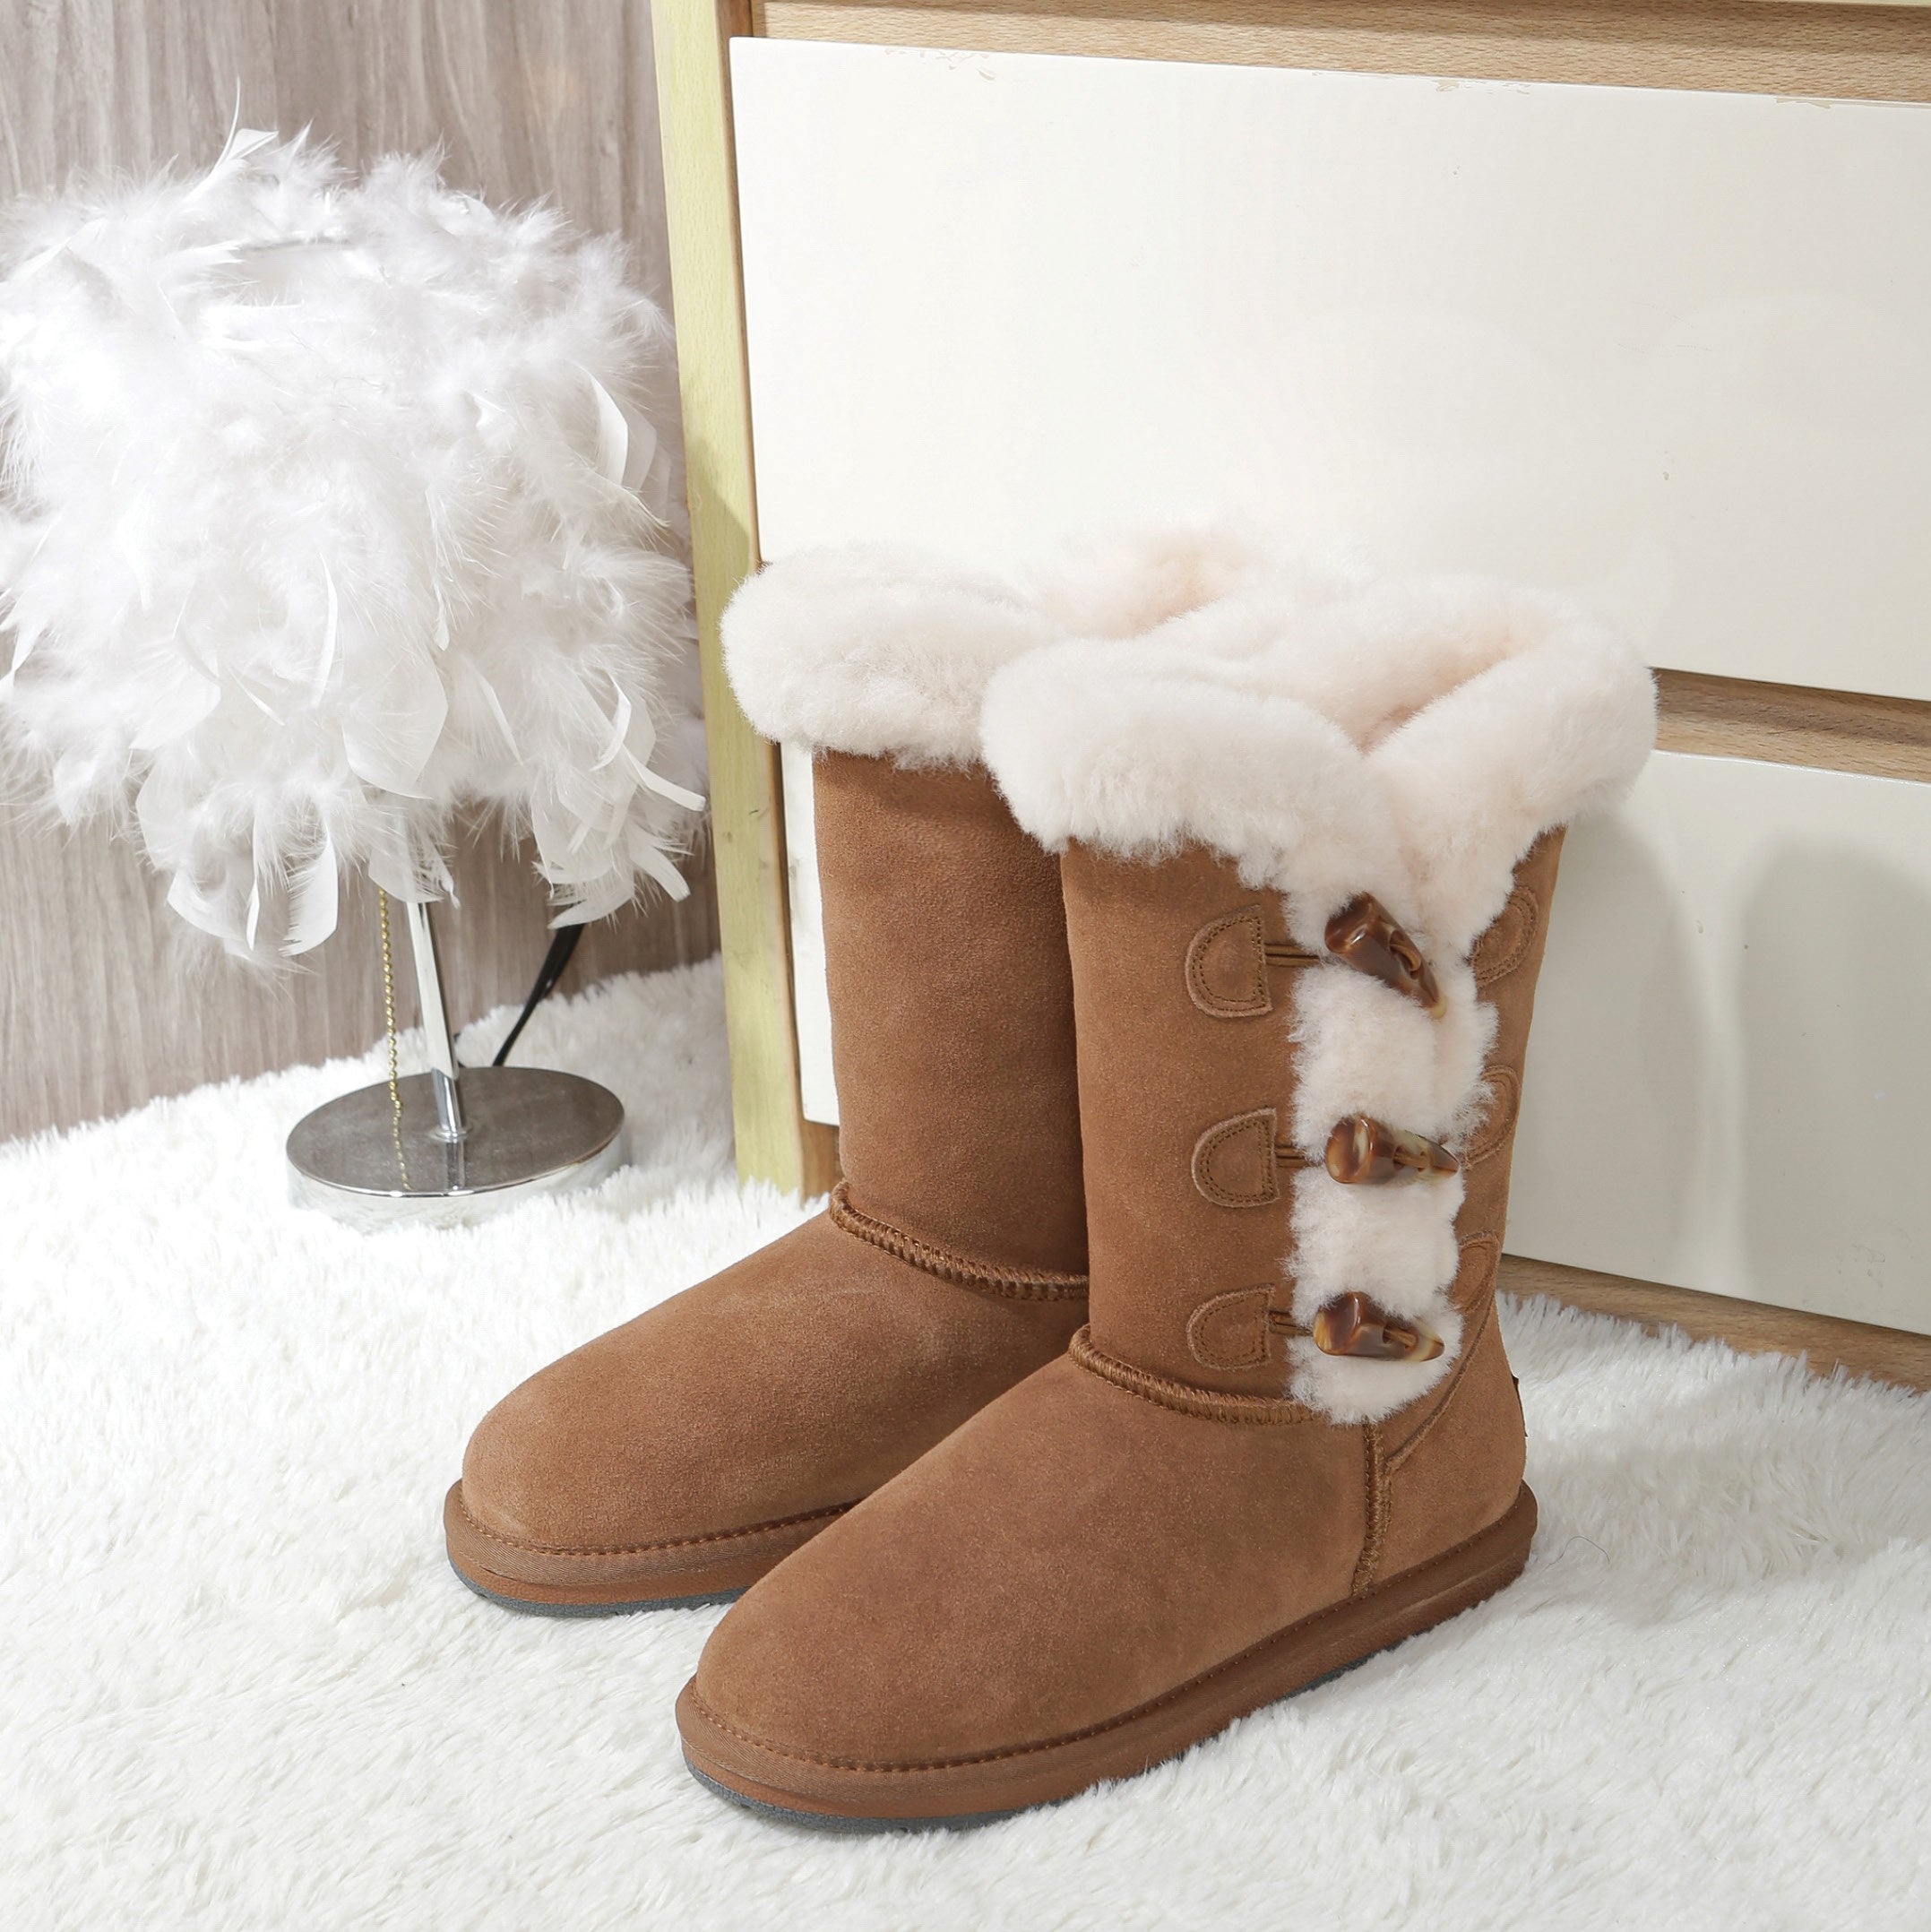 Step by step guide on how to clean UGGs